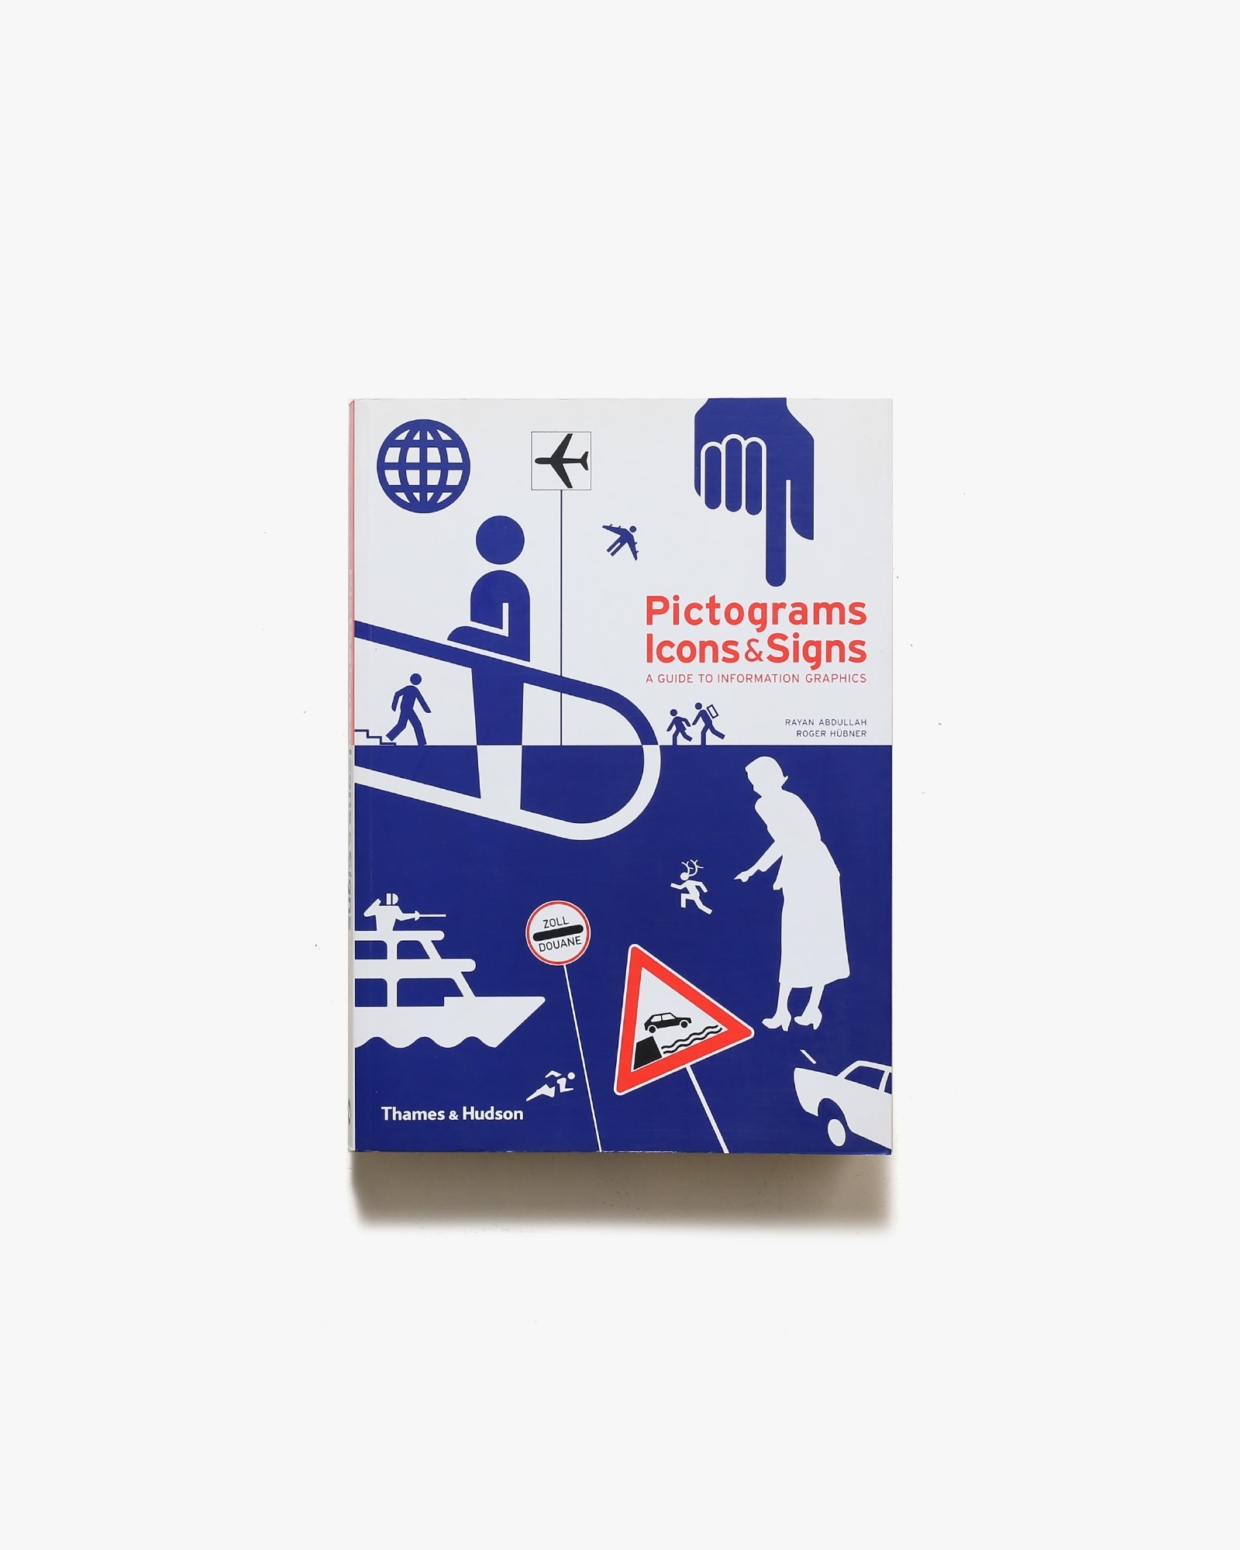 Pictograms, Icons ＆ Signs: A Guide to Information Graphics | Thames & Hudson